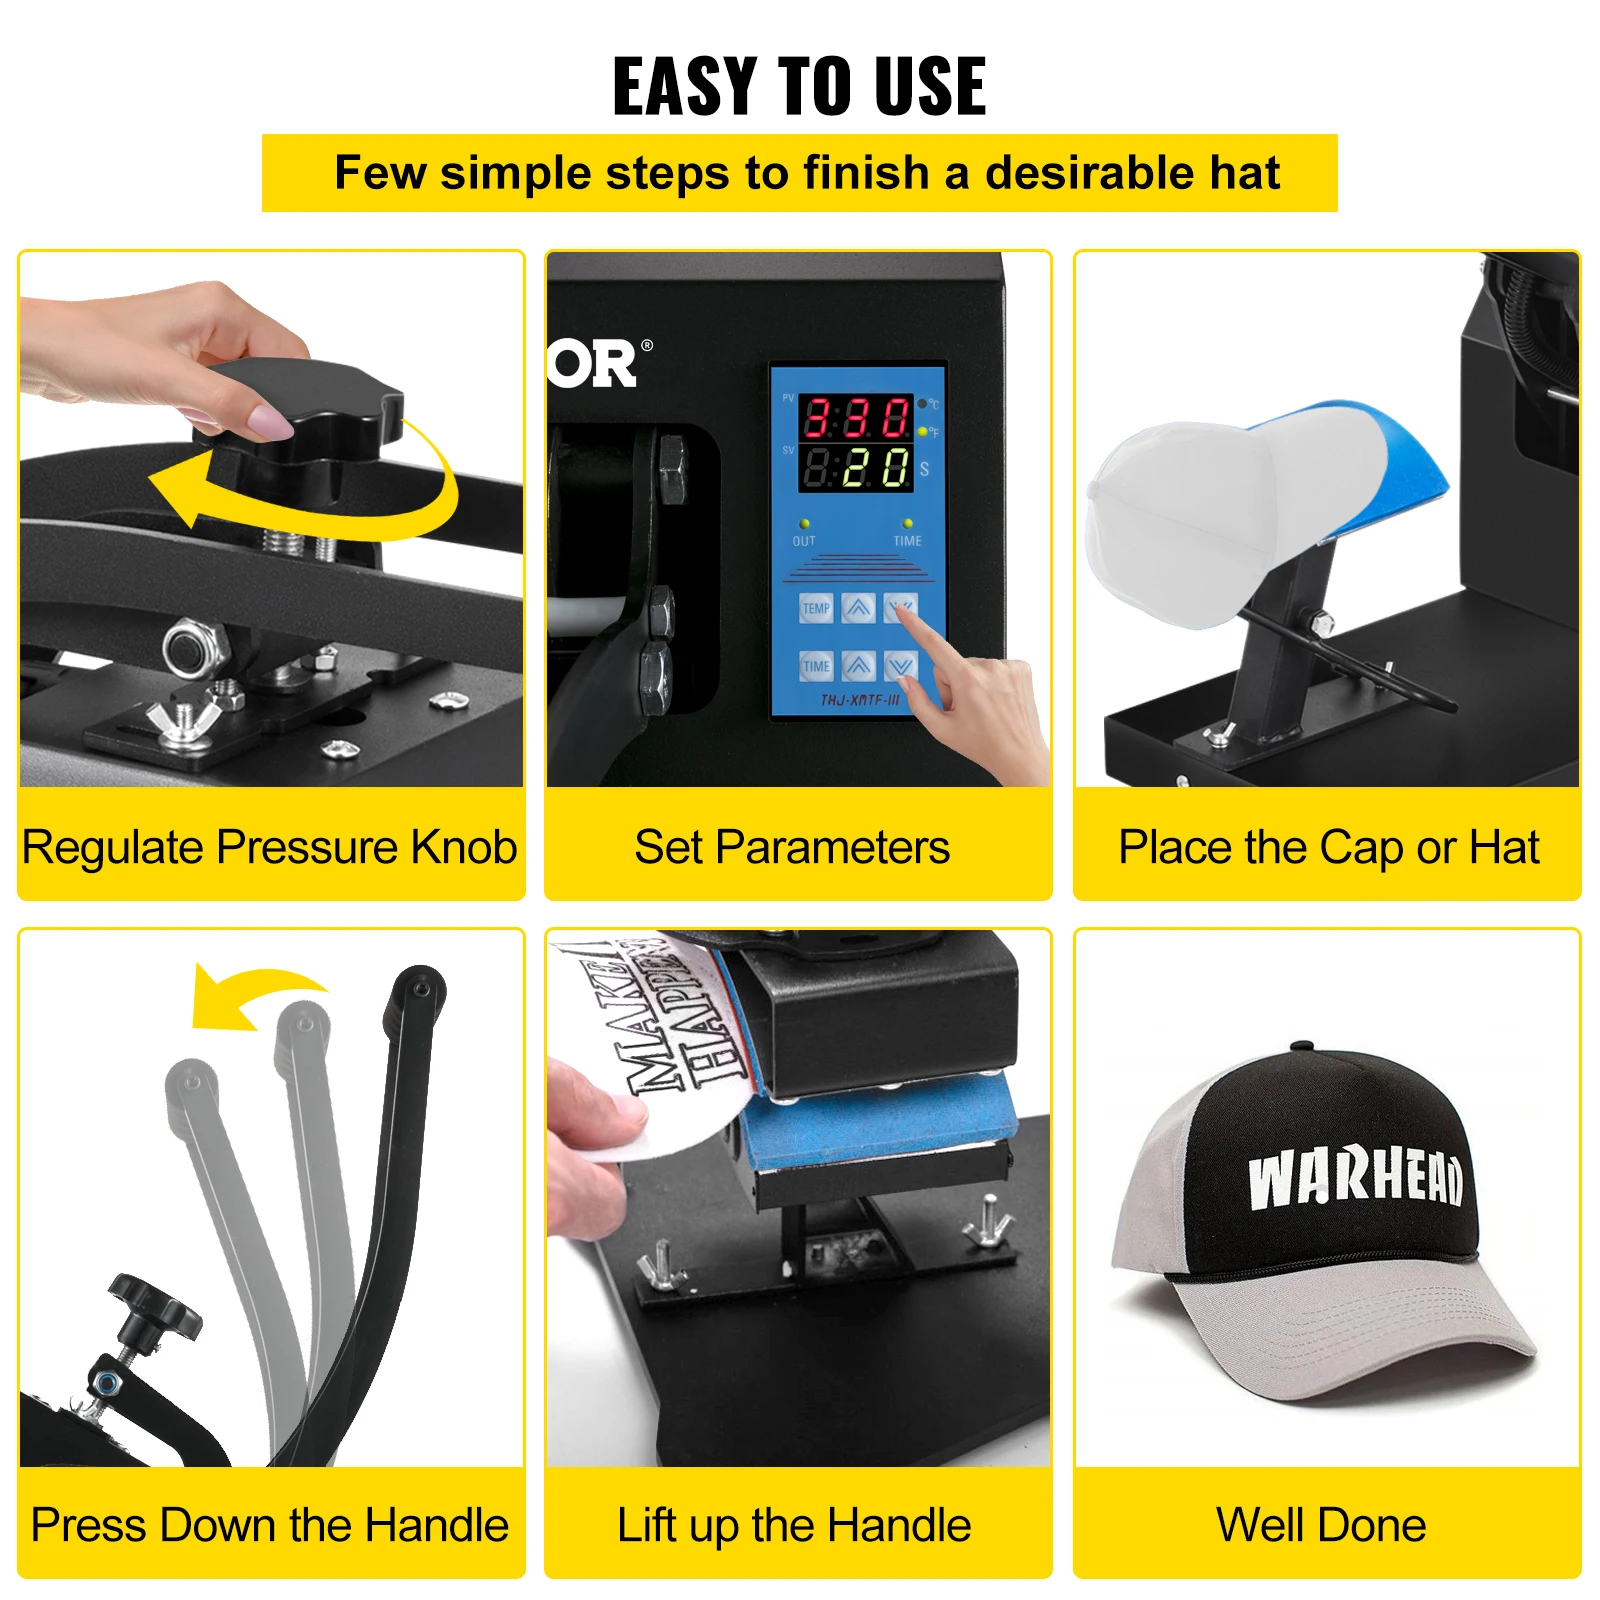 Hat Cap Heat Press 110V 5.5 x 3.5 inch Heat Transfer Stamping Sublimation  Machine Digital Display Clamshell for DIY Advertising - AliExpress